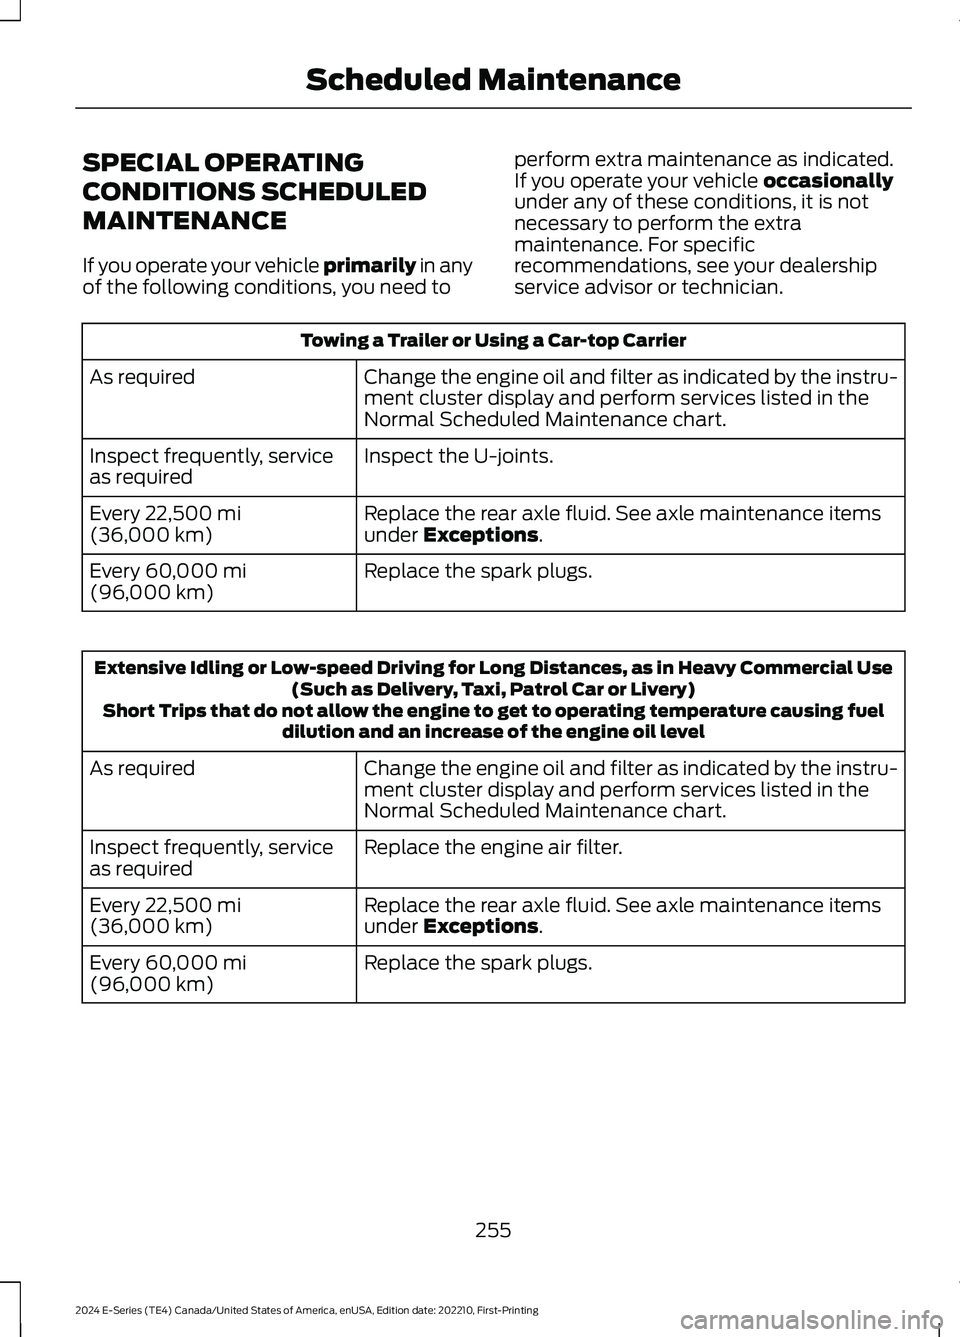 FORD E SERIES 2024  Owners Manual SPECIAL OPERATING
CONDITIONS SCHEDULED
MAINTENANCE
If you operate your vehicle primarily in anyof the following conditions, you need to
perform extra maintenance as indicated.If you operate your vehic